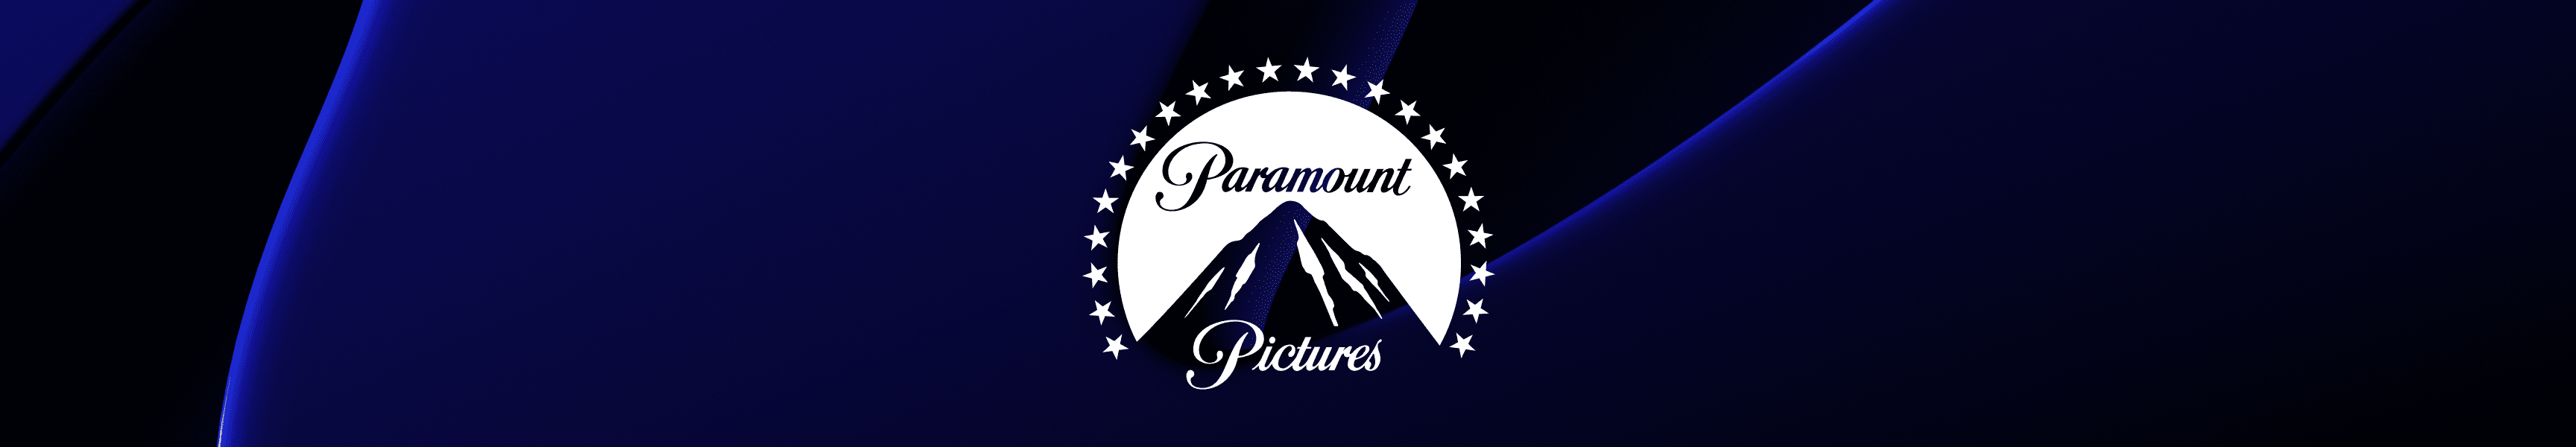 Paramount Pictures Coffee Mugs